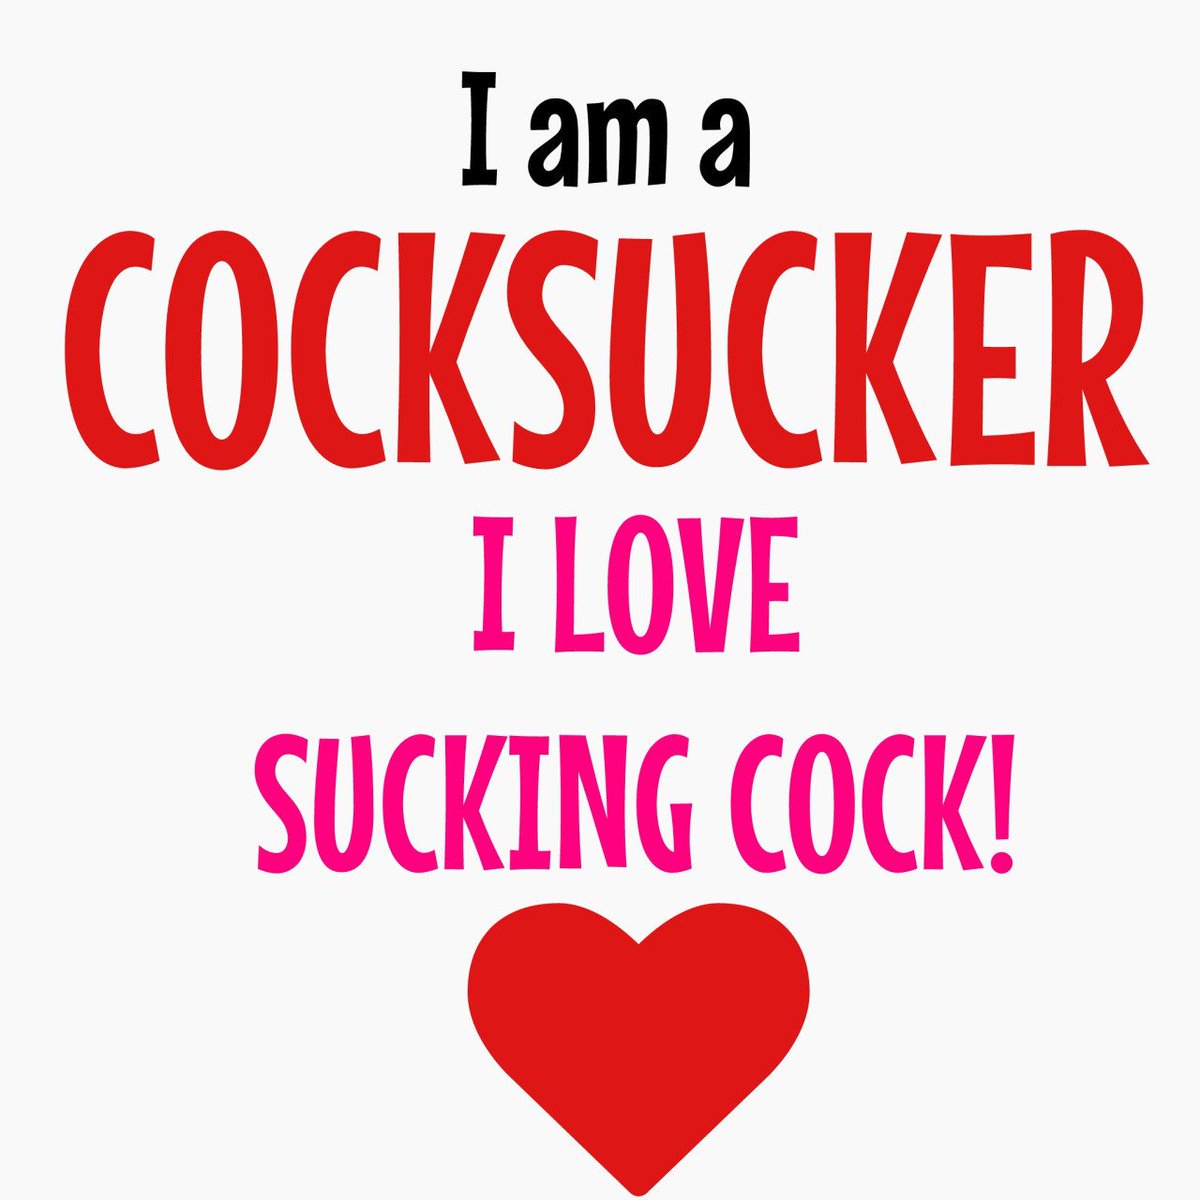 Are you sure you do, if yes cocksucker, retweet and follow me up slutty who...